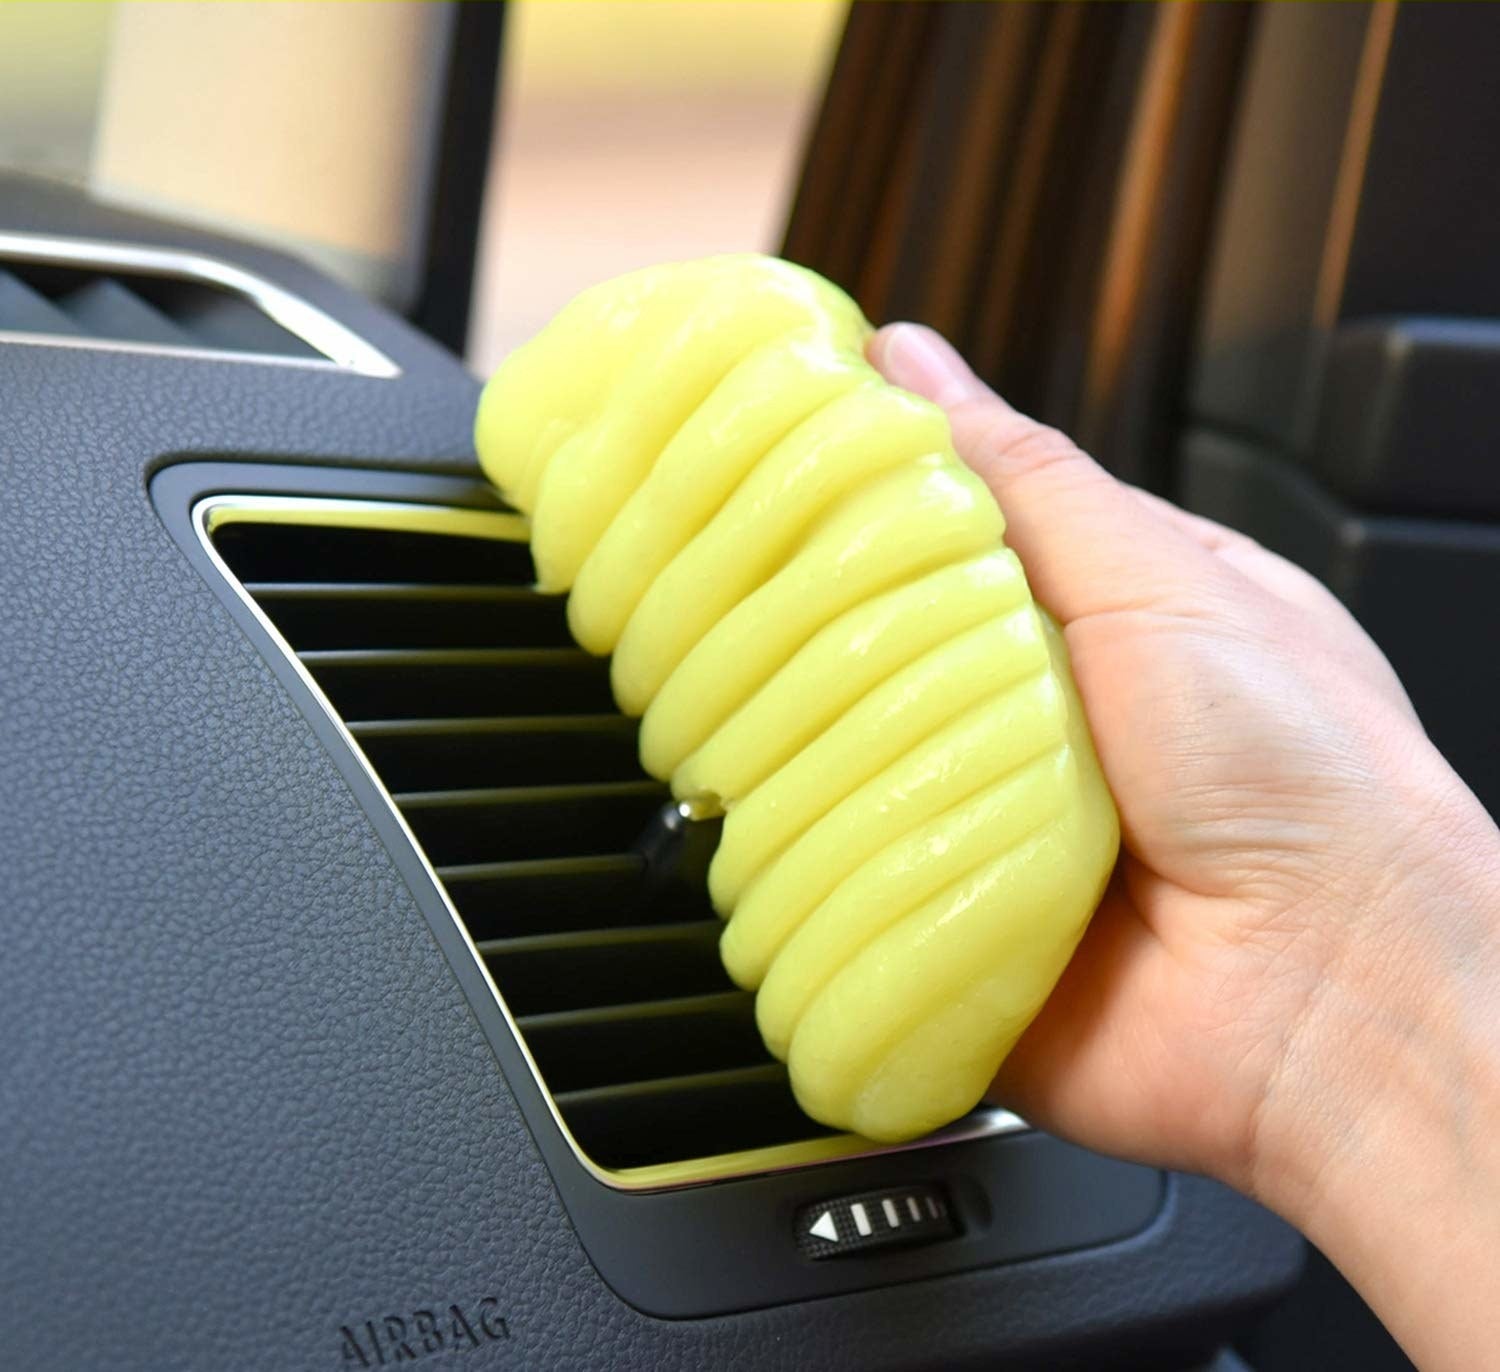 A person peeling a ball of slime off a car air vent